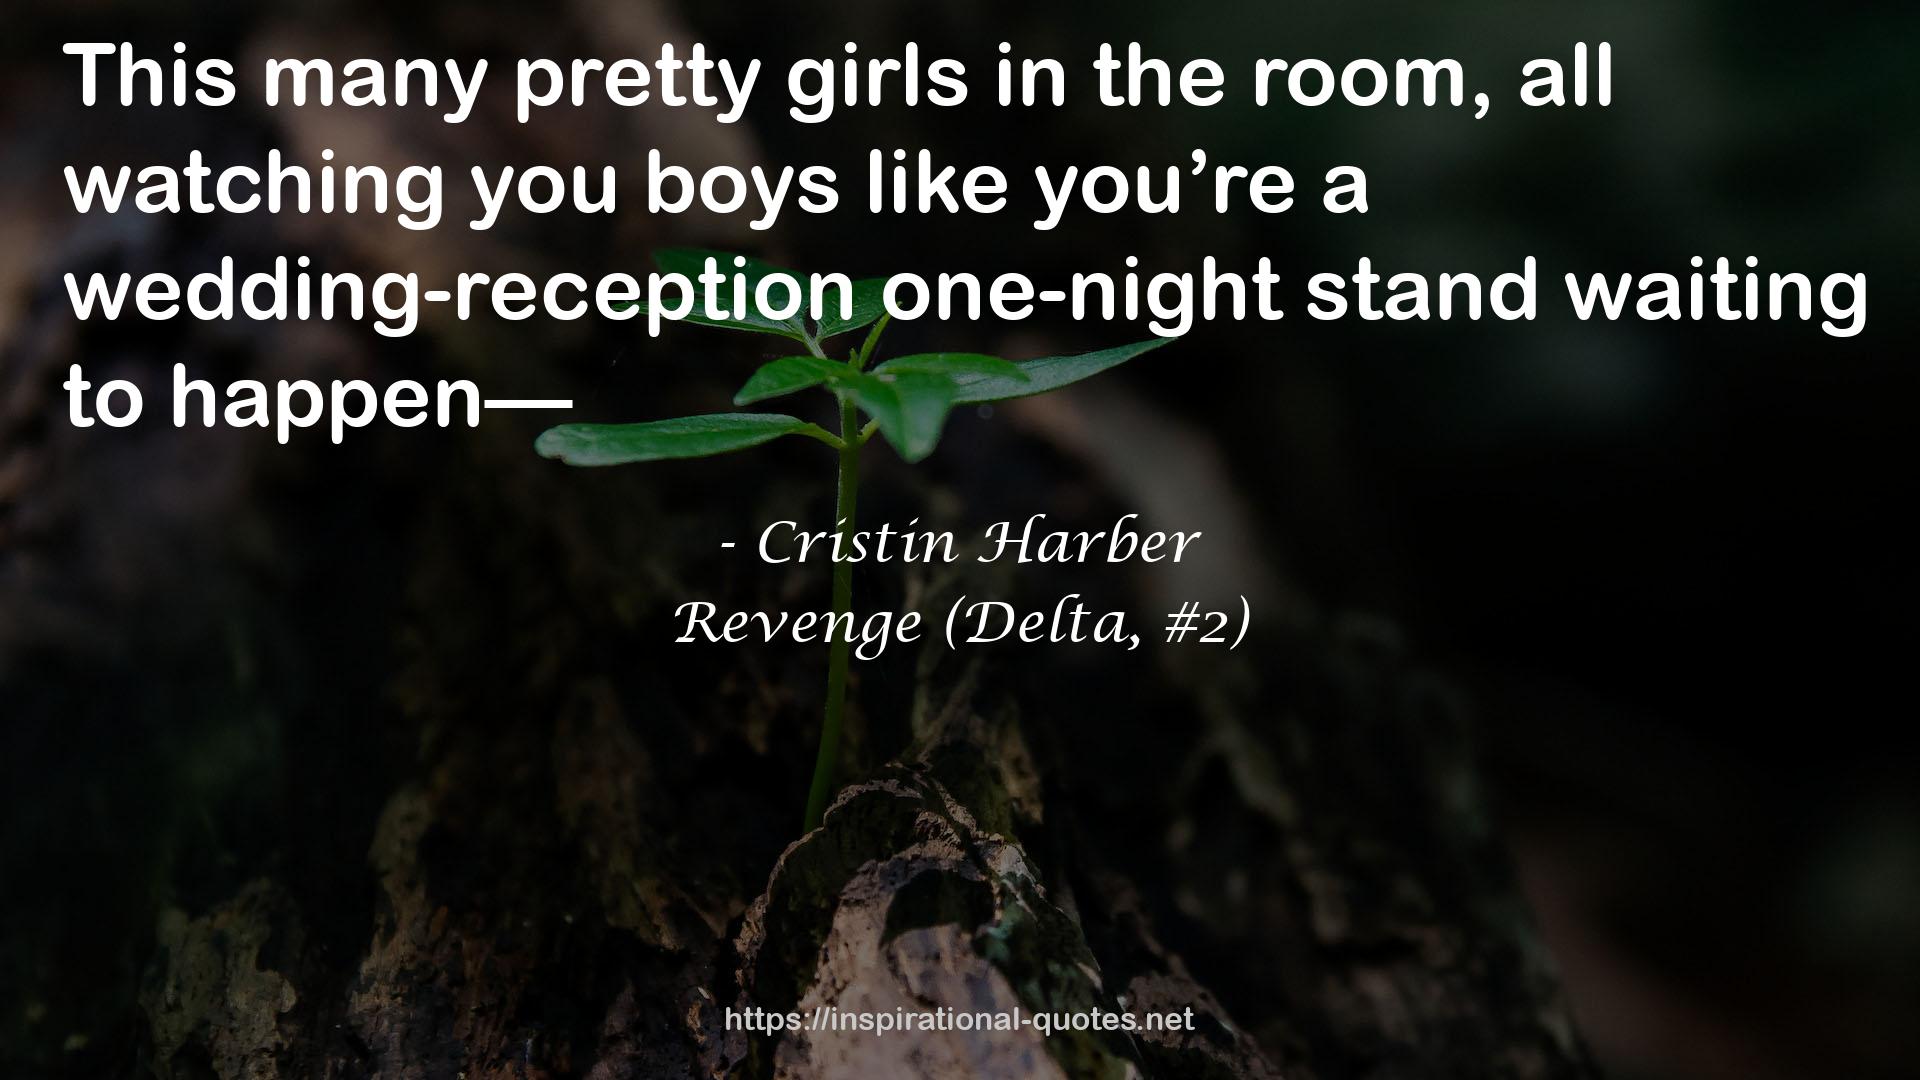 a wedding-reception one-night stand  QUOTES